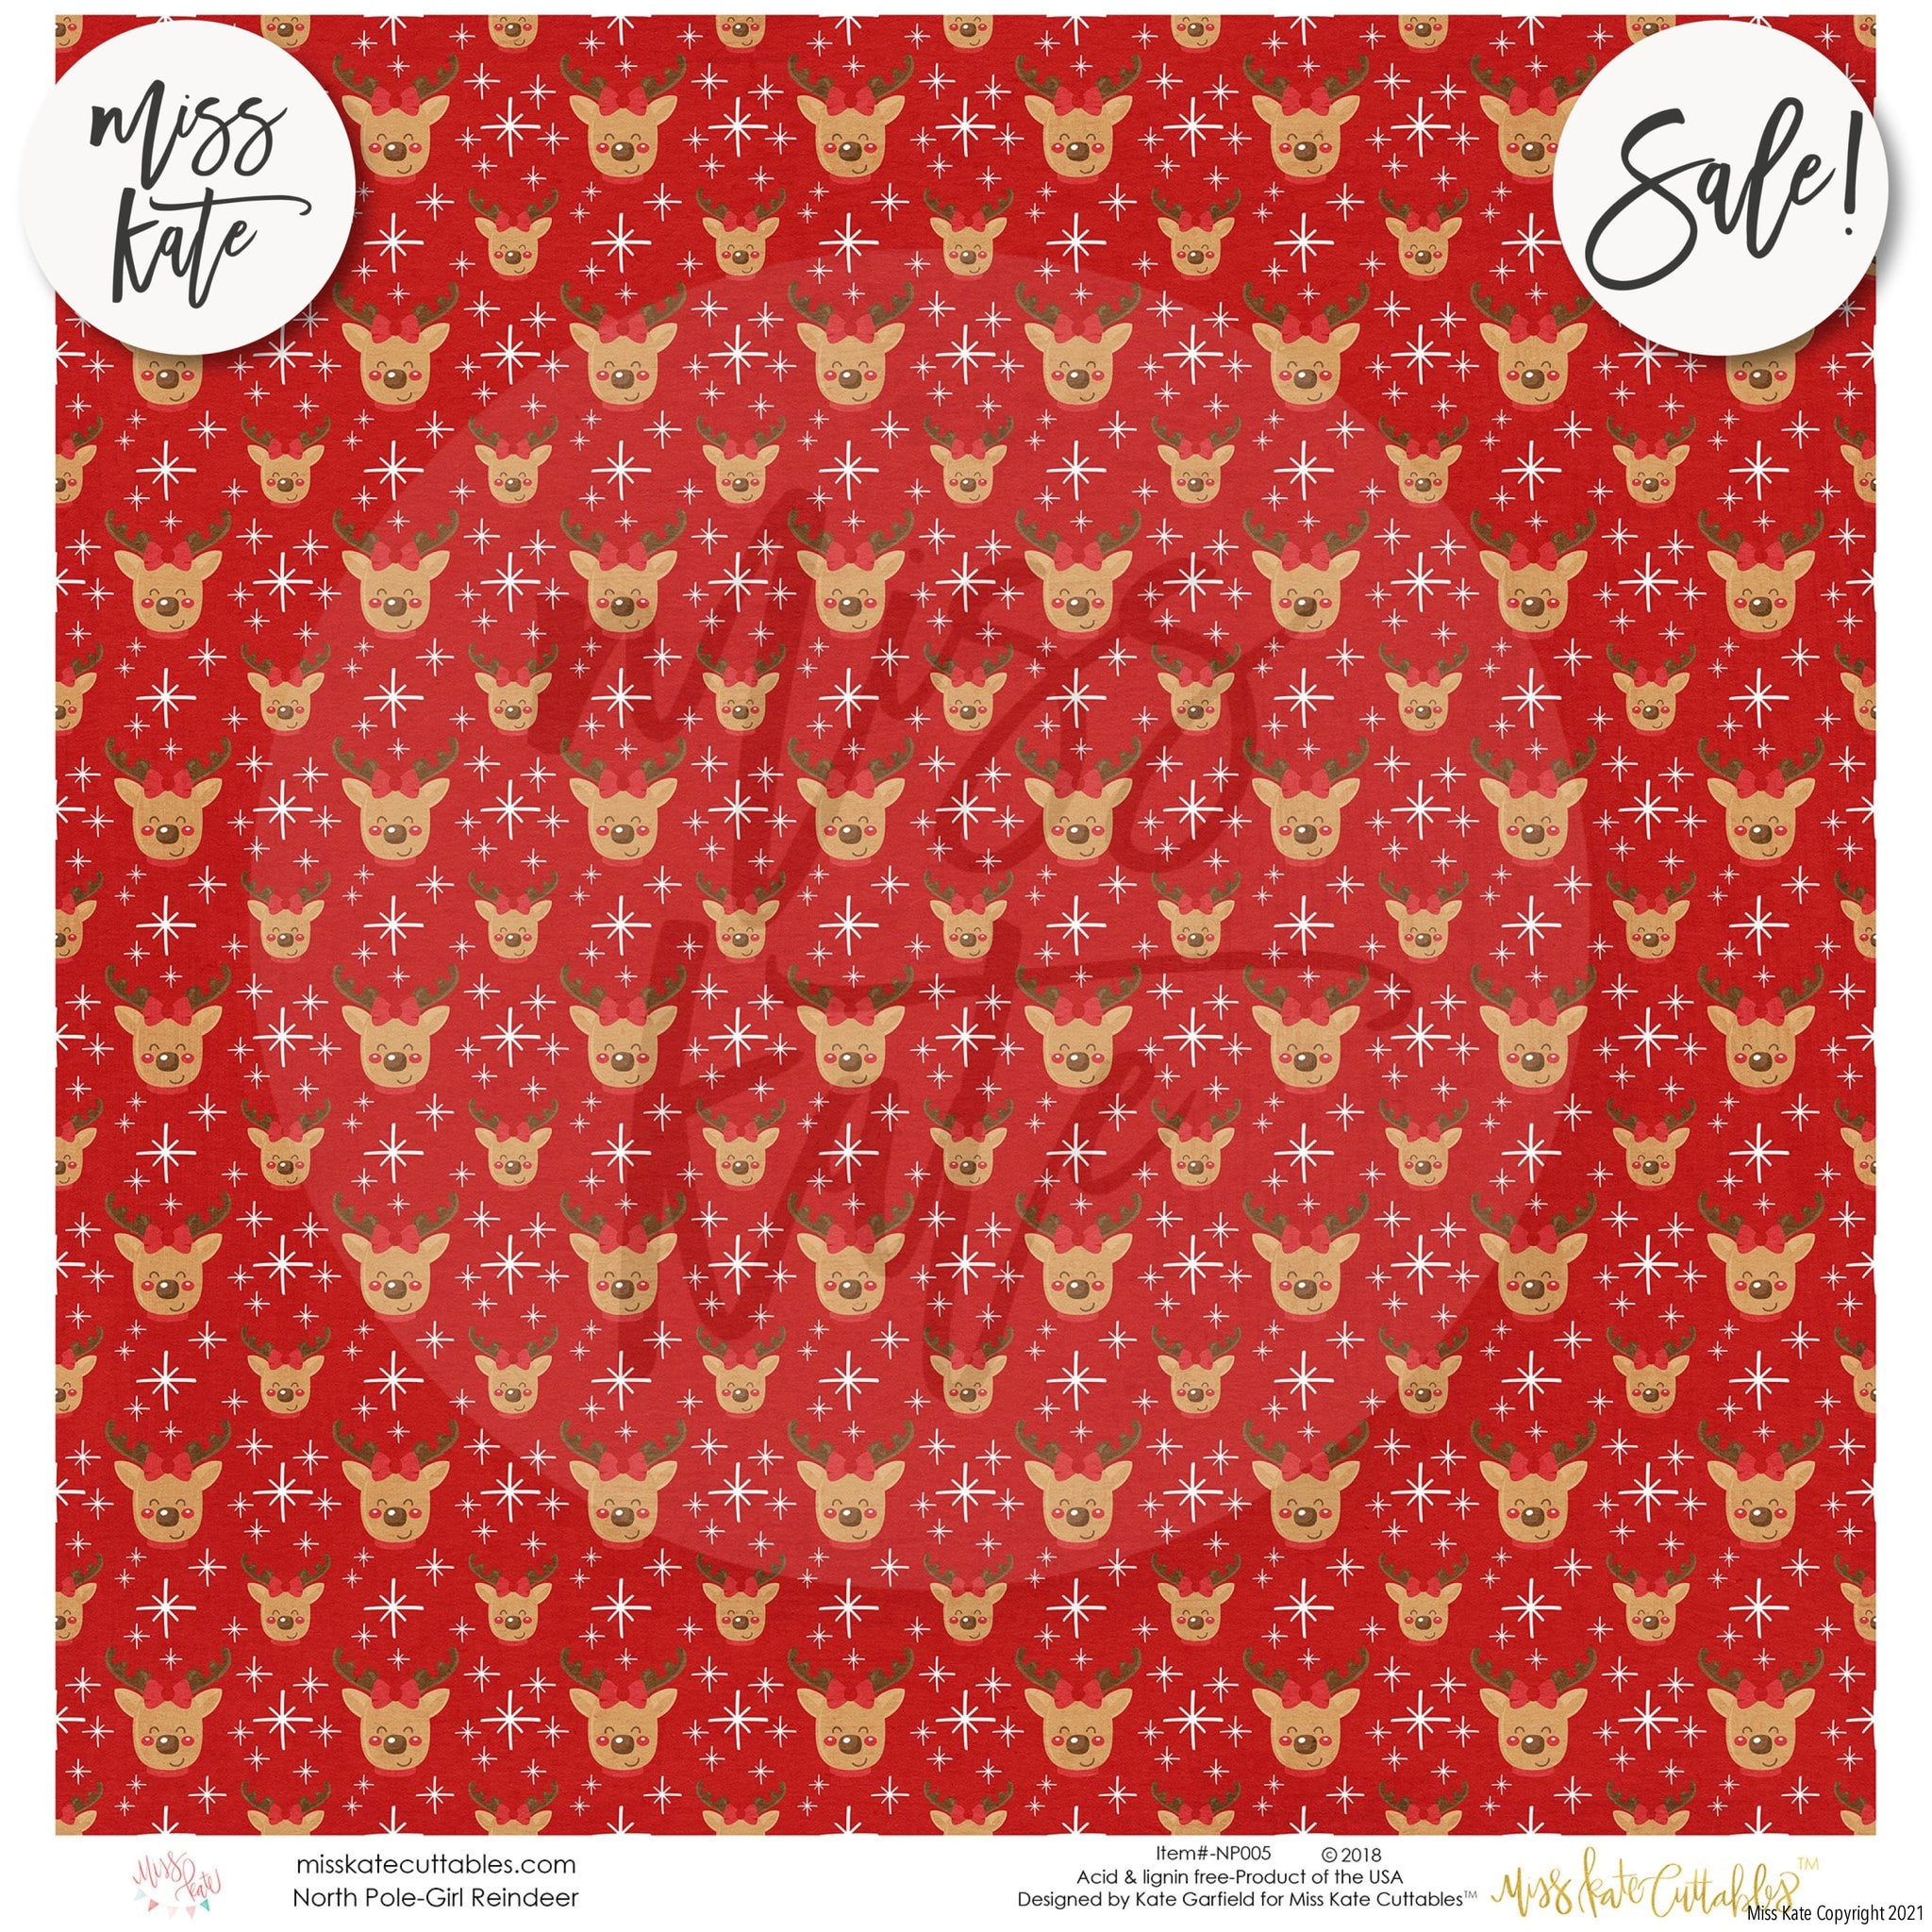 Re-Fabbed Christmas Scrapbook Paper Pack (2 options) - Re-Fabbed